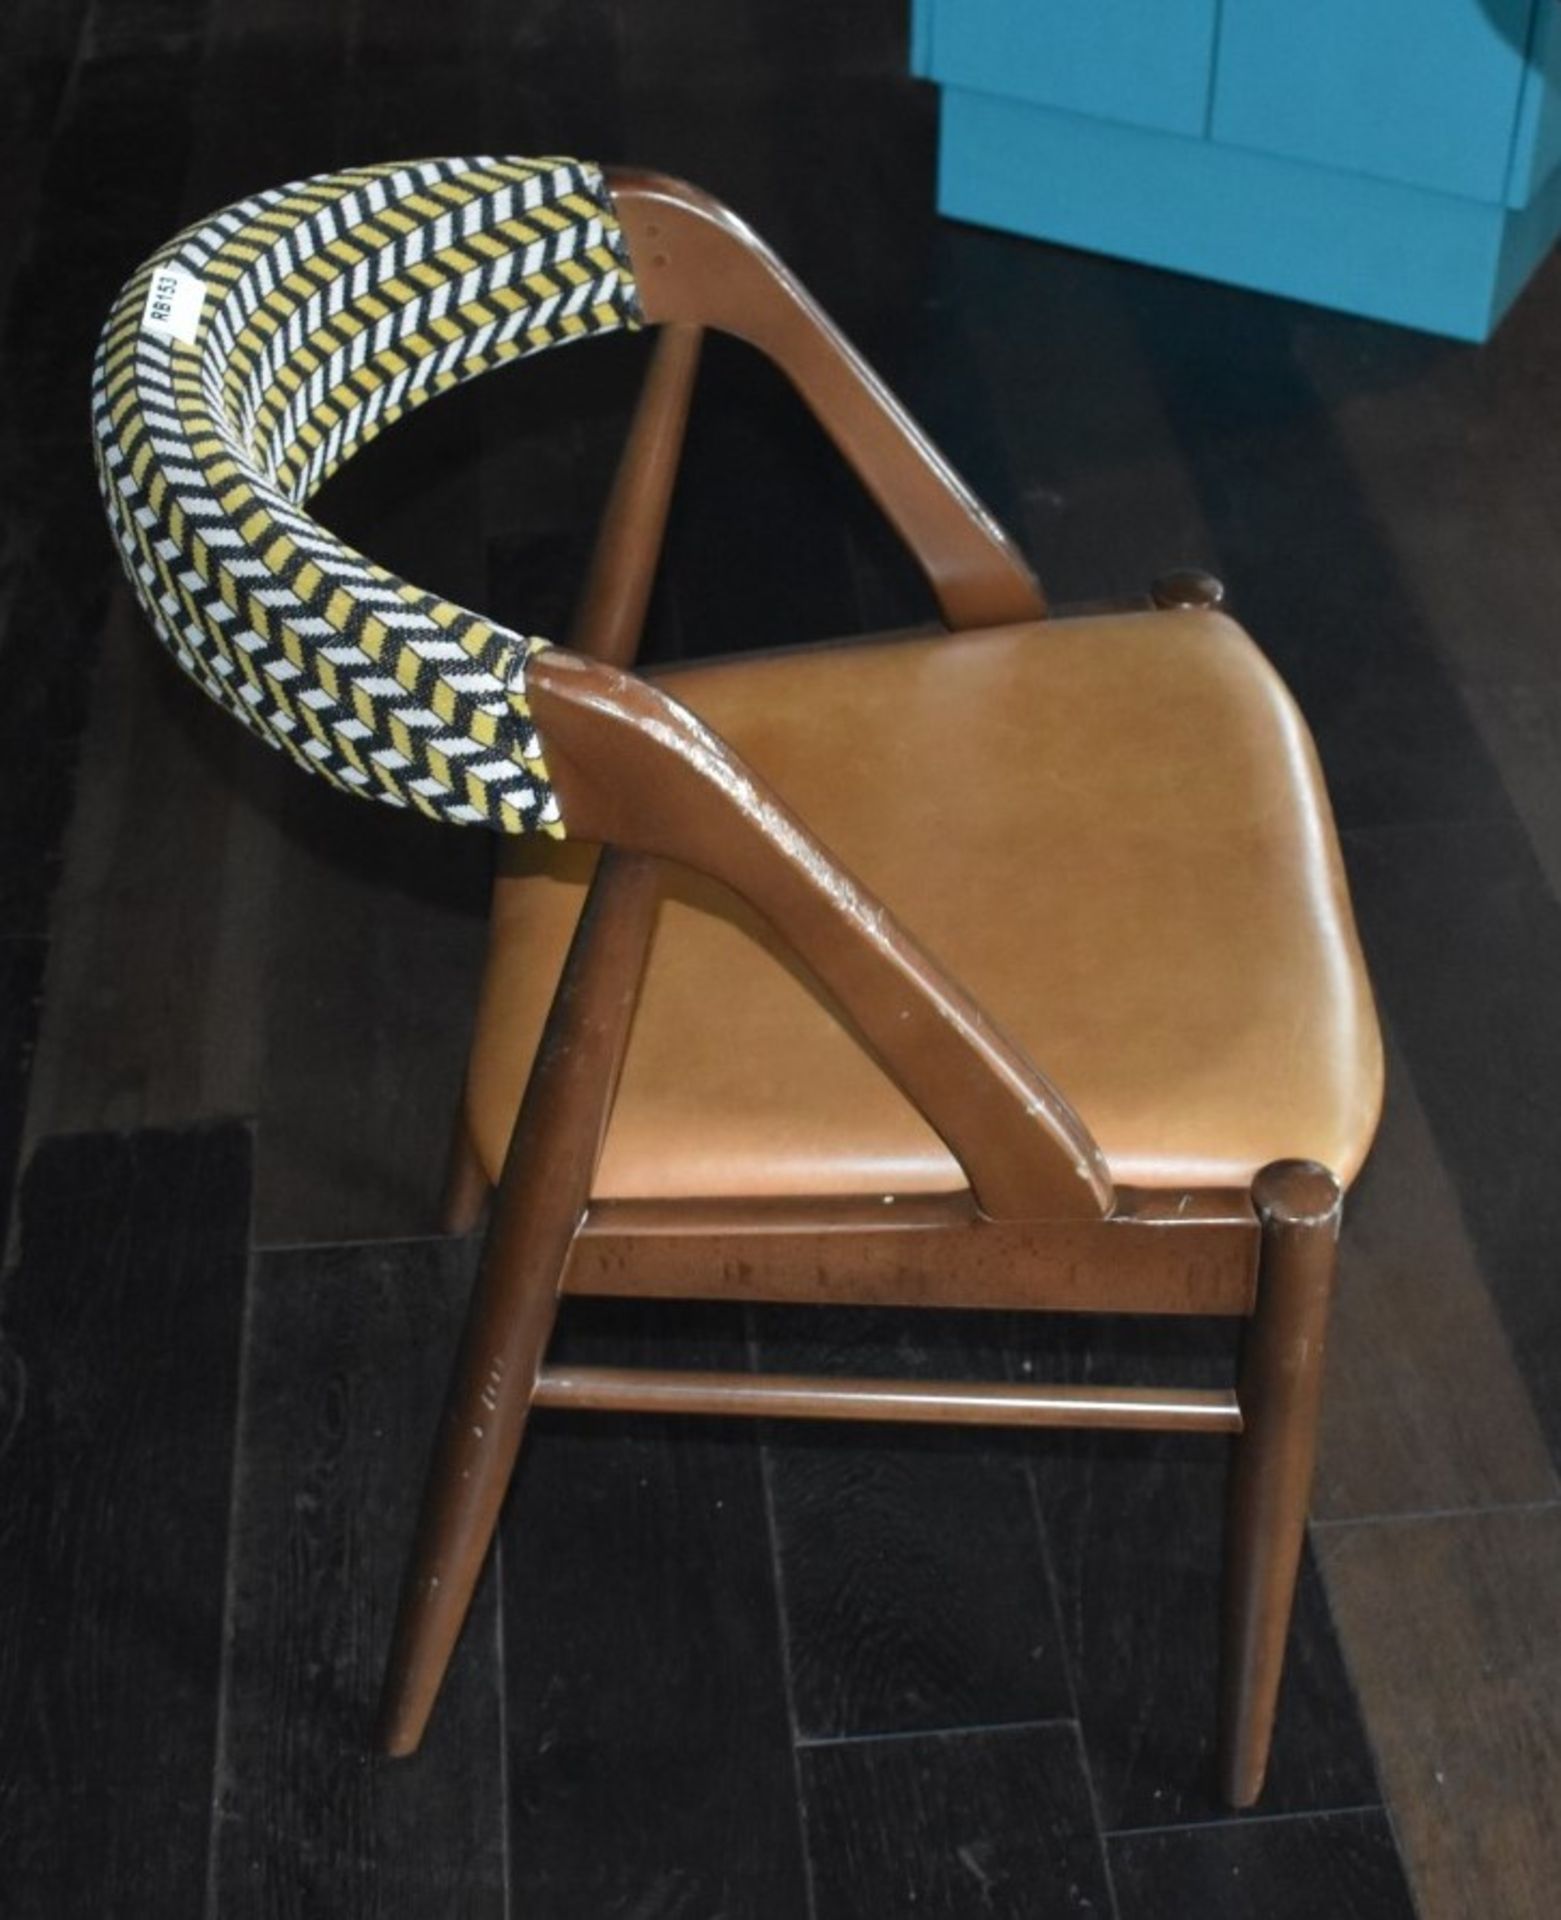 2 x Dining Chairs With Bent Wood Frames, Tan Seats and Fabric Backrests - Ref: RB153 - CL558 - - Image 3 of 3